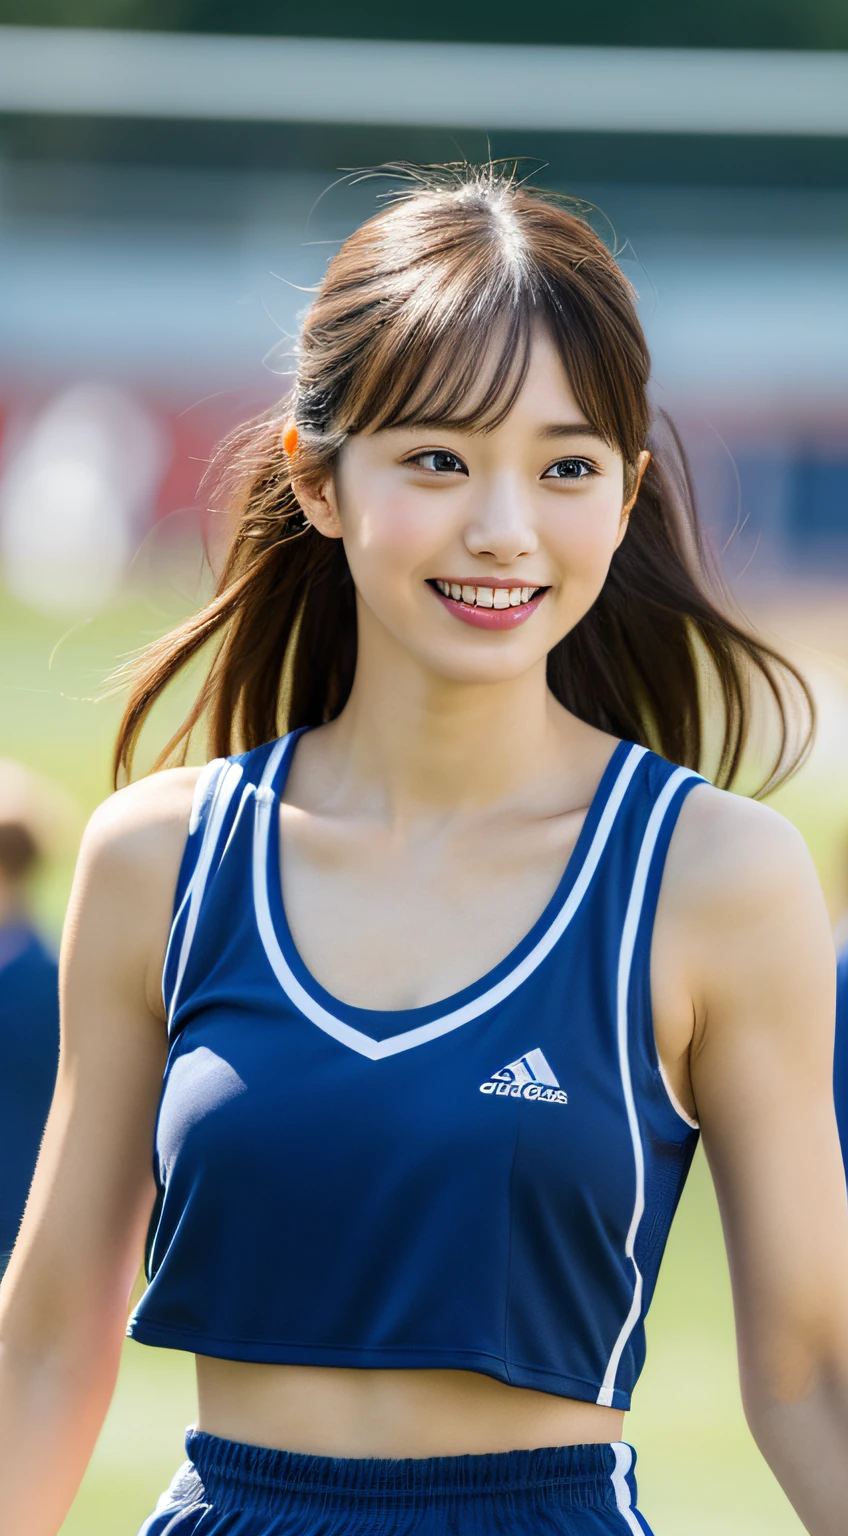 high-level image quality, masutepiece, Best Quality, Illustration, Ultra-detailed, finely detail, hight resolution, 8K Wallpapers, Perfect dynamic composition, Beautiful detailed eyes, Medium Hair, (Colossal tits:1.2), Natural Color Lip,  Smile, sport uniform, short length of tank top, athletic field, Athletics track, shortpants, (Tight abs:1.1), blurry backround, big breasts thin waist